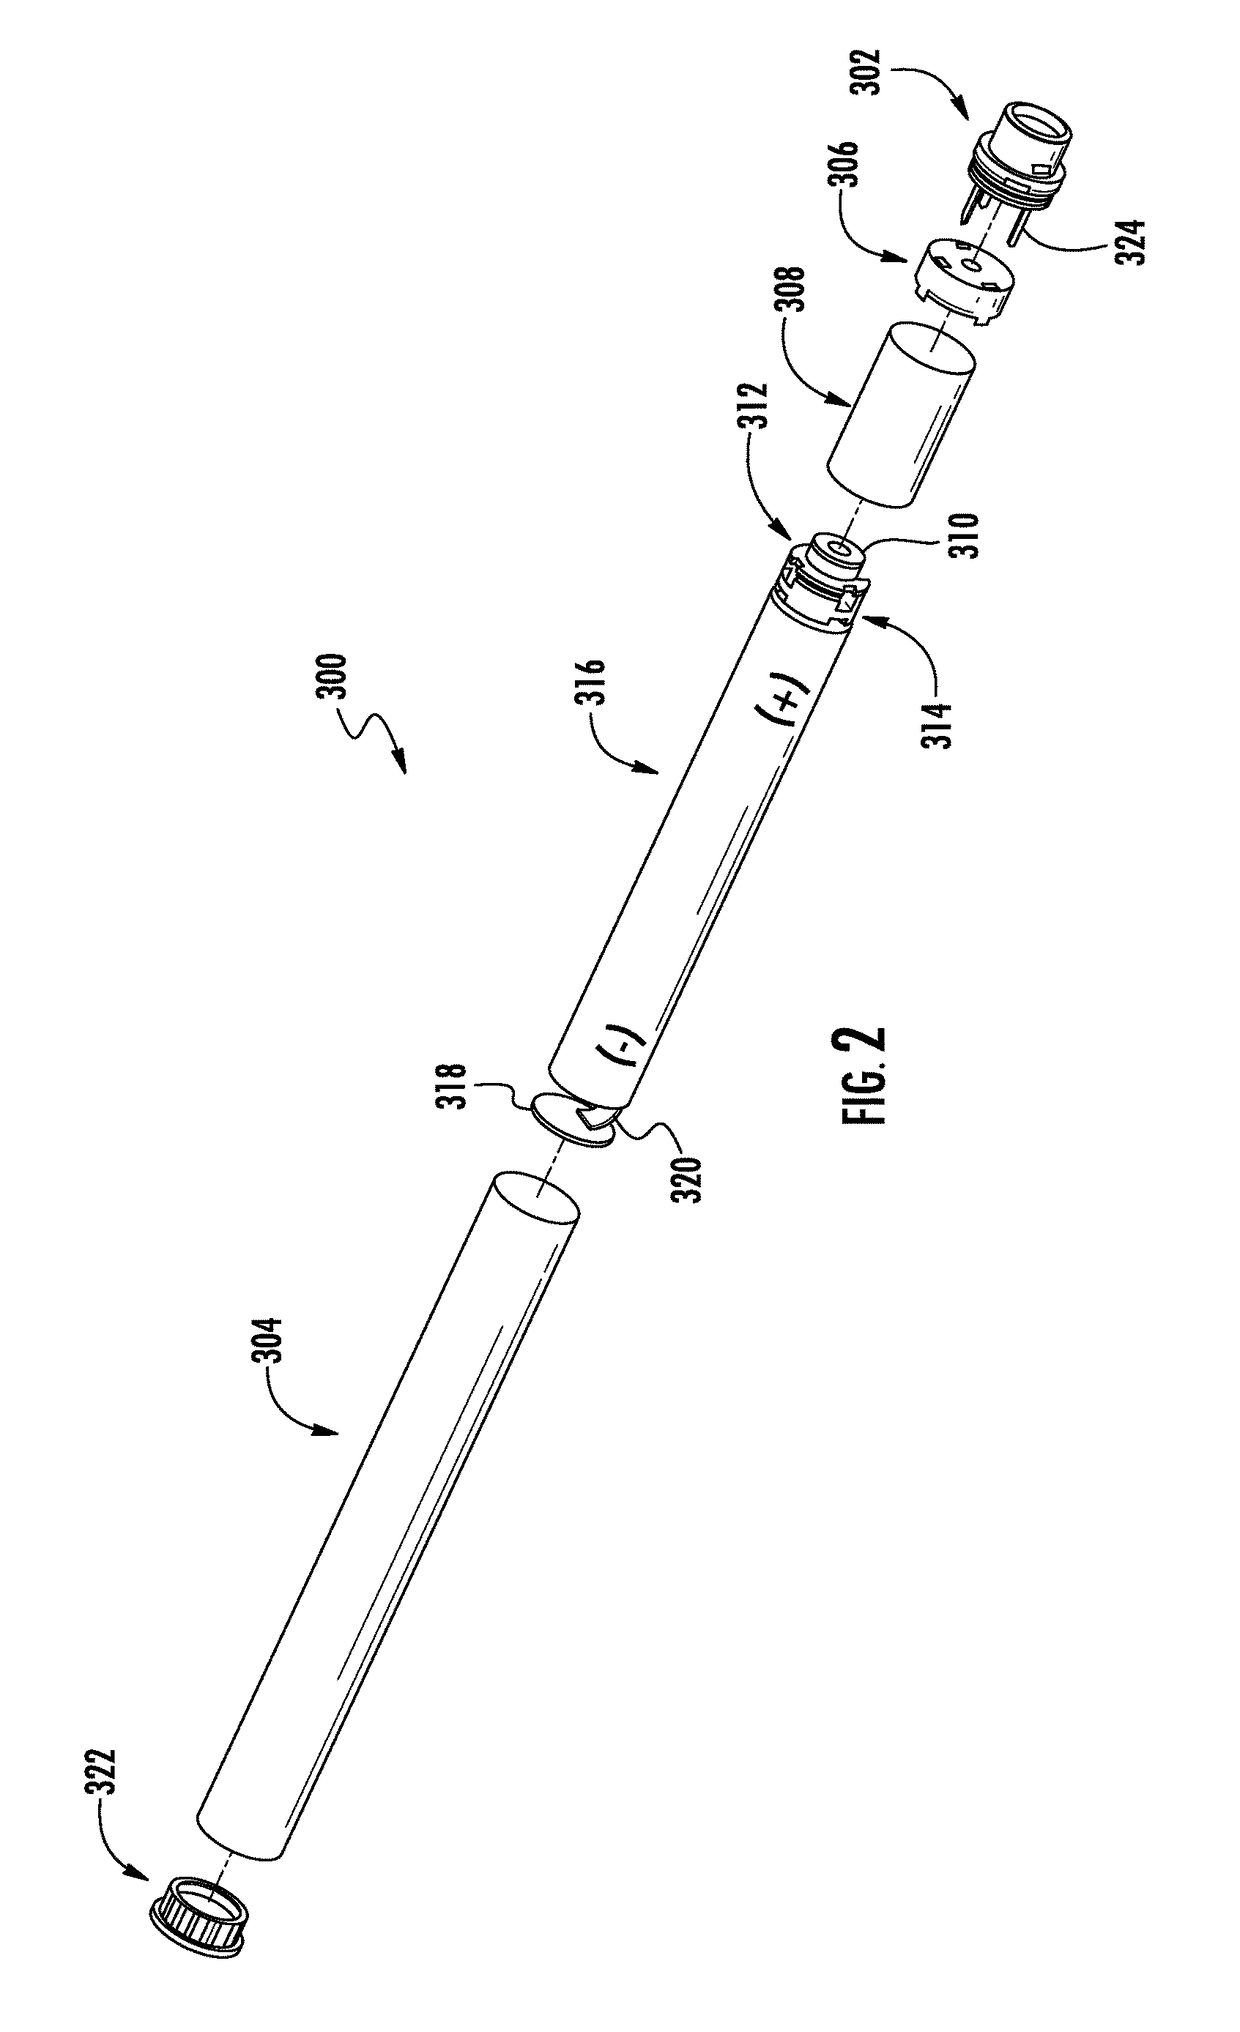 Method for assembling a cartridge for a smoking article